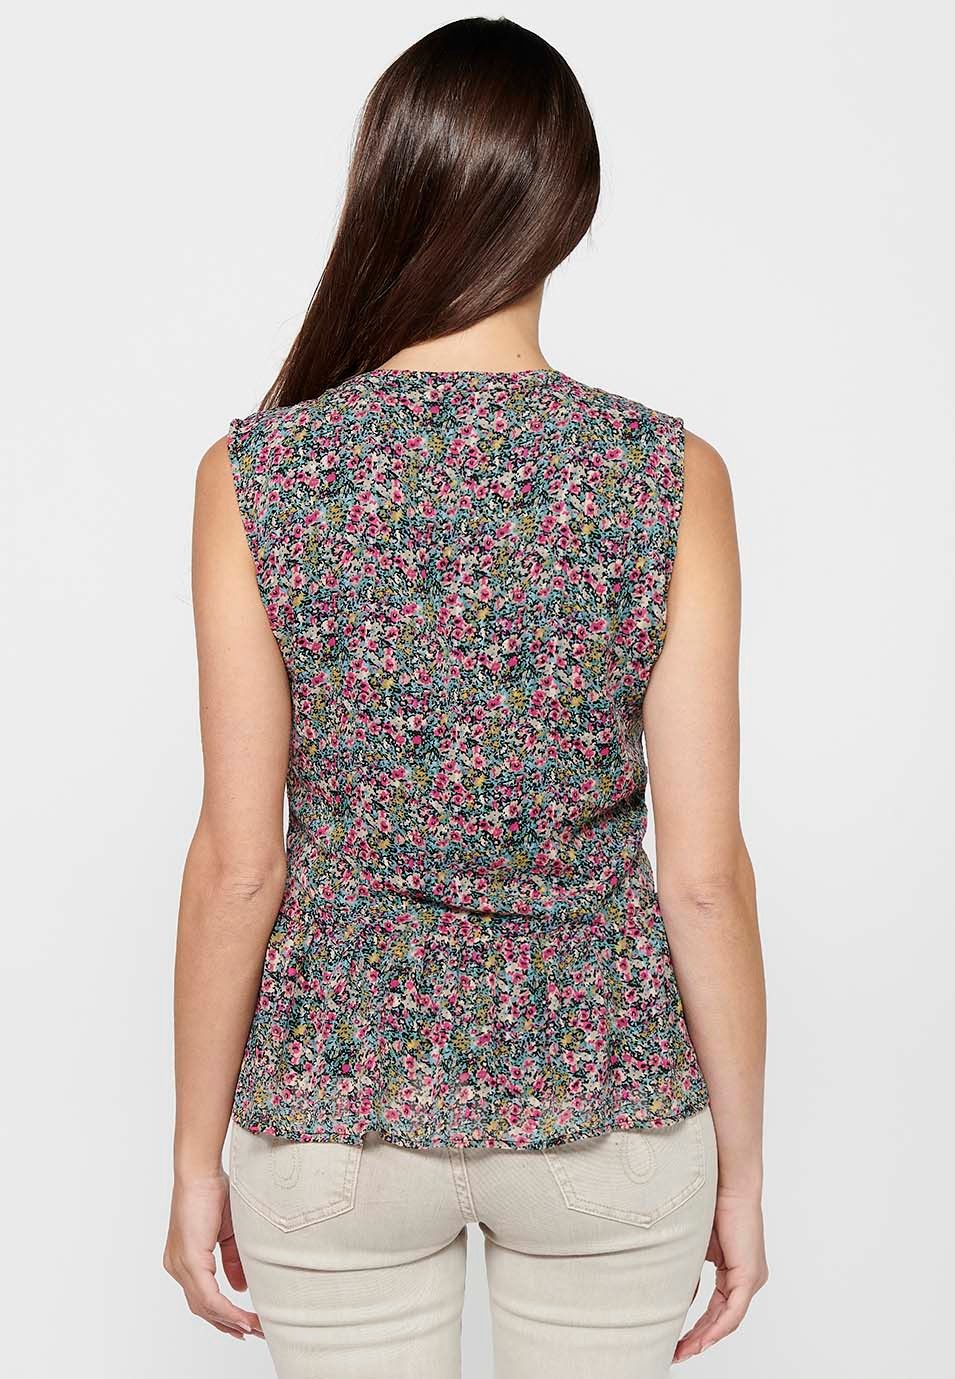 Sleeveless blouse with V-neck and floral print with ruffle finish and front button details in Multicolor for Women 6